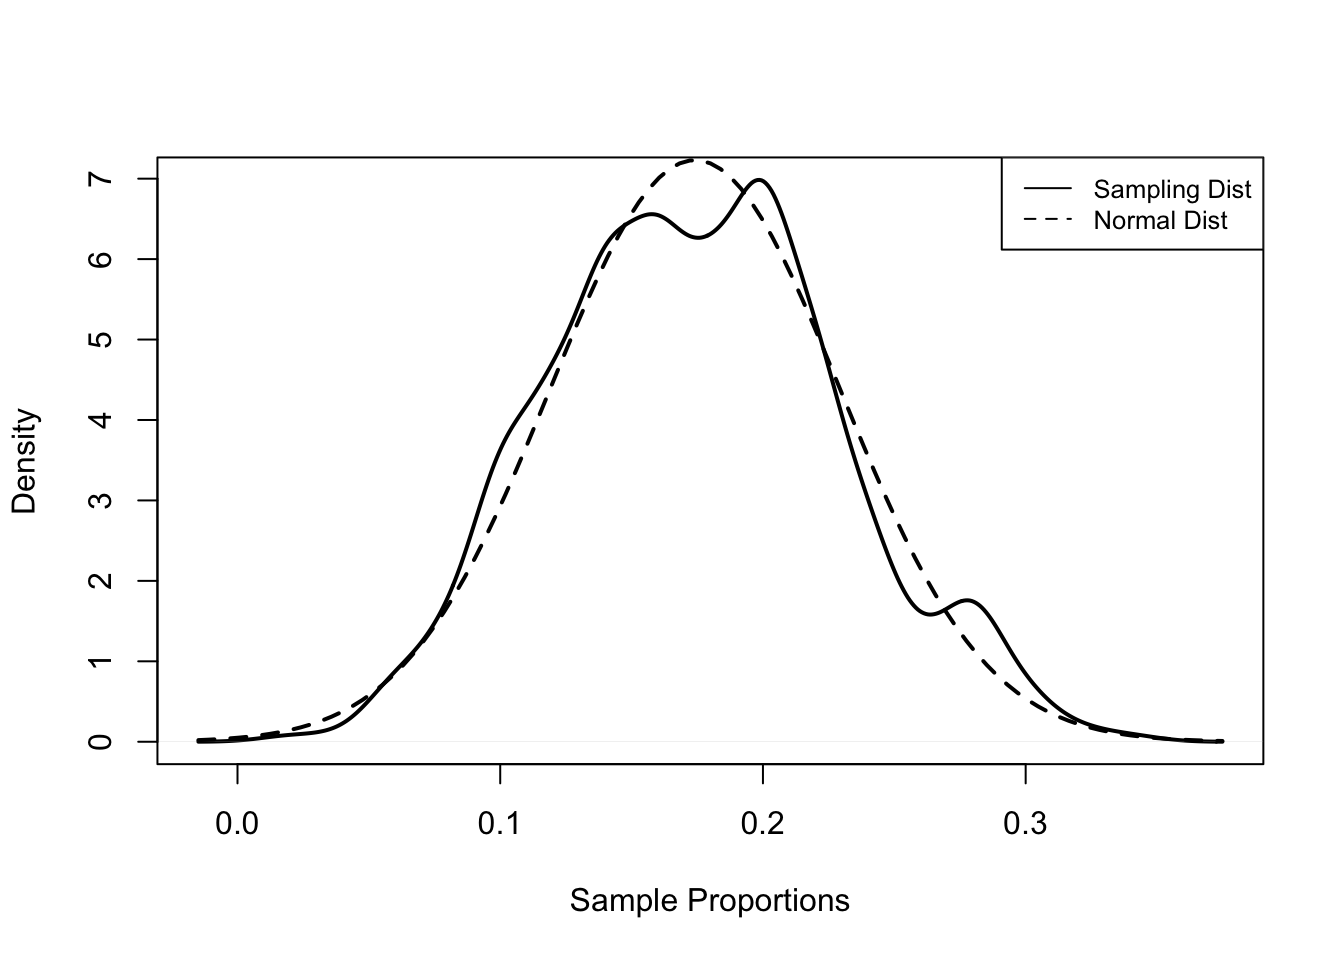 Normal and Sampling Distribution (Proportion), 500 Samples of 50 Counties